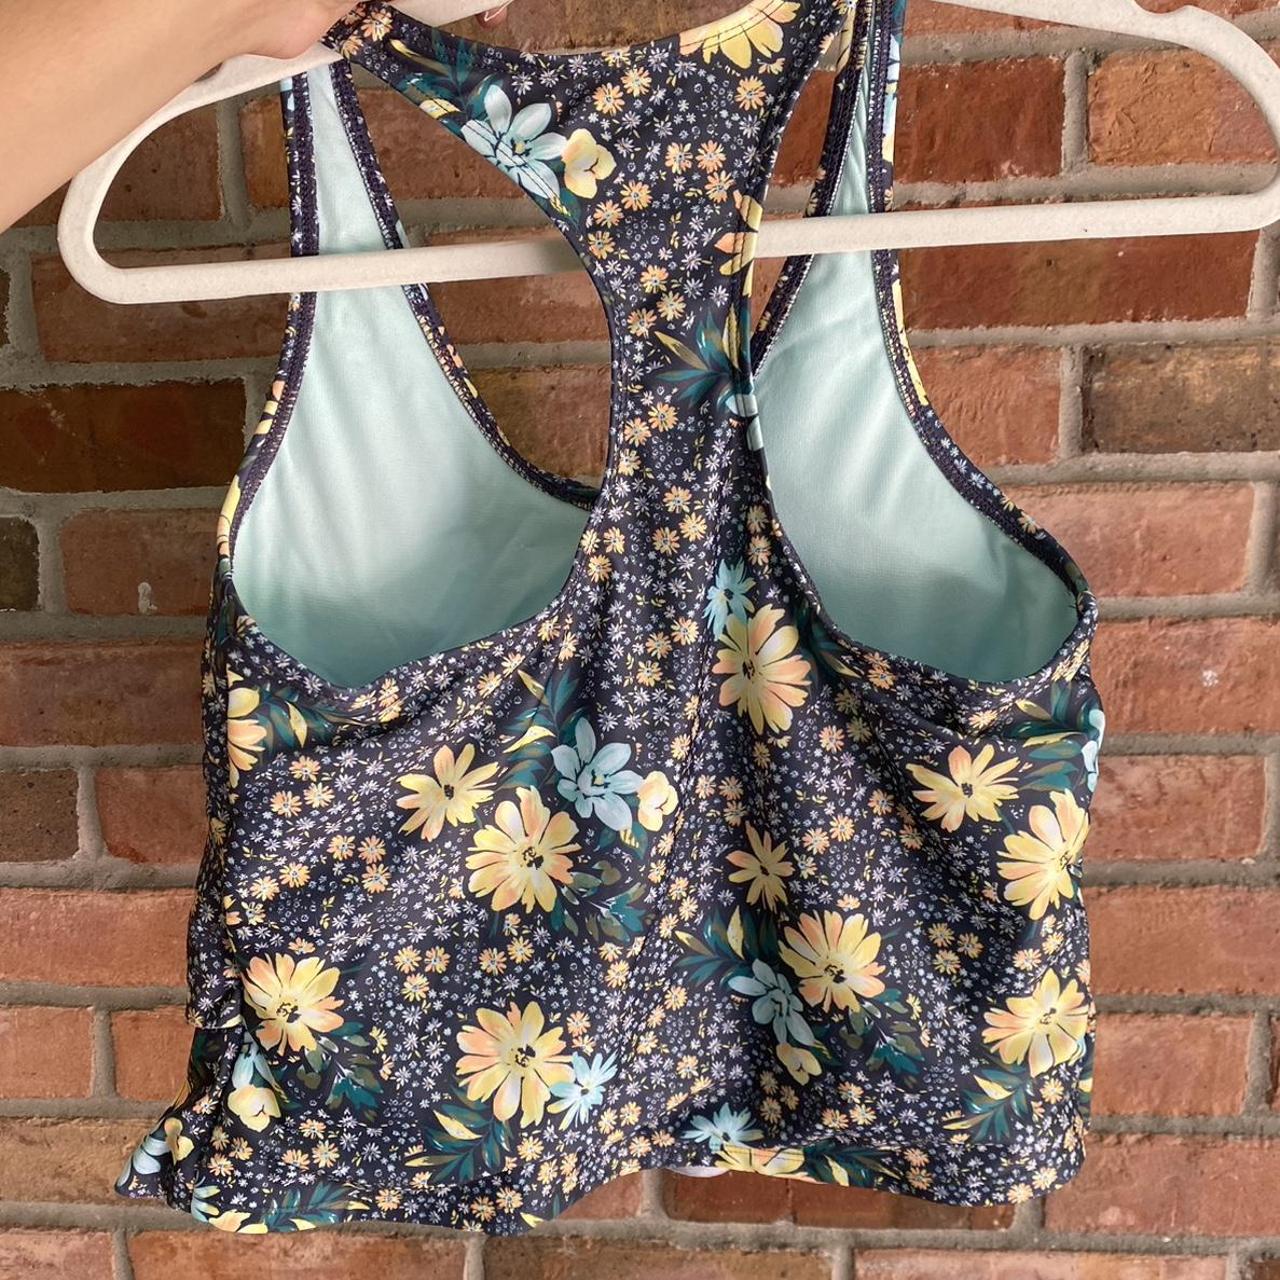 Floral ruffle exercise top Cute workout sports bra / - Depop